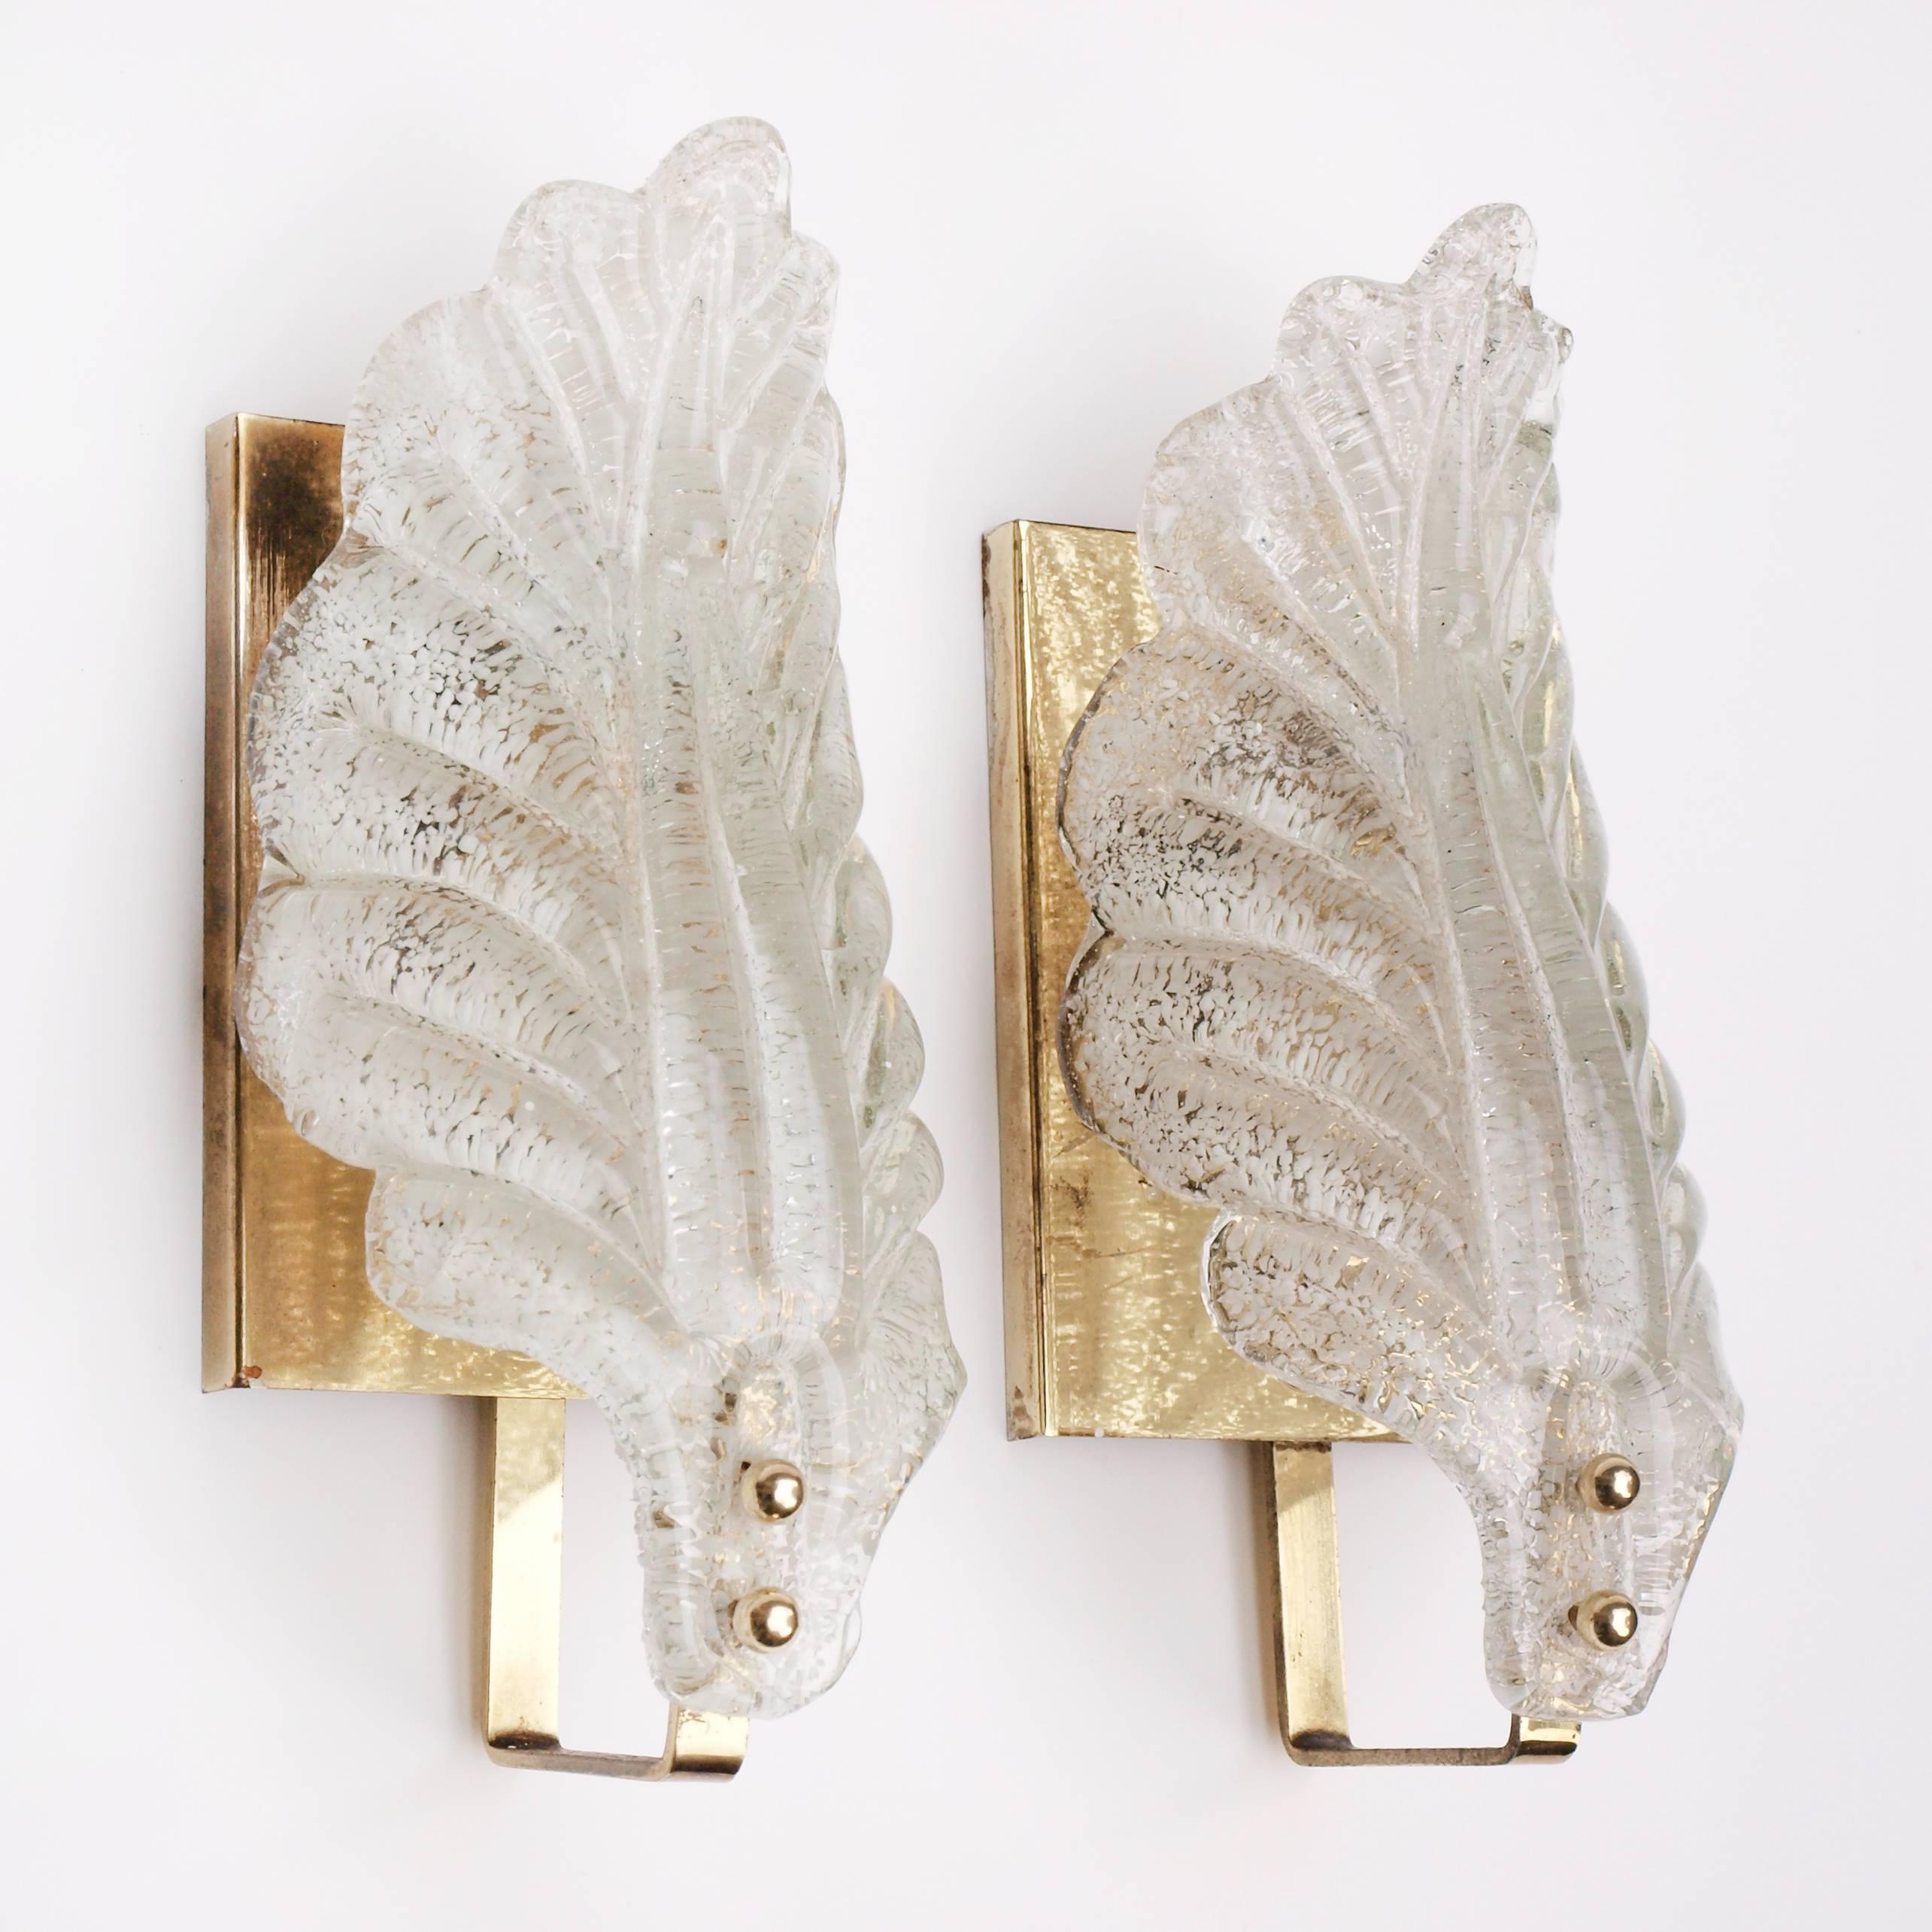 A pair of 1950s Murano leaf shaped sconces with a white speckled pattern to the glass. The glass leaves are held to brass plates with two spherical brass fixings.